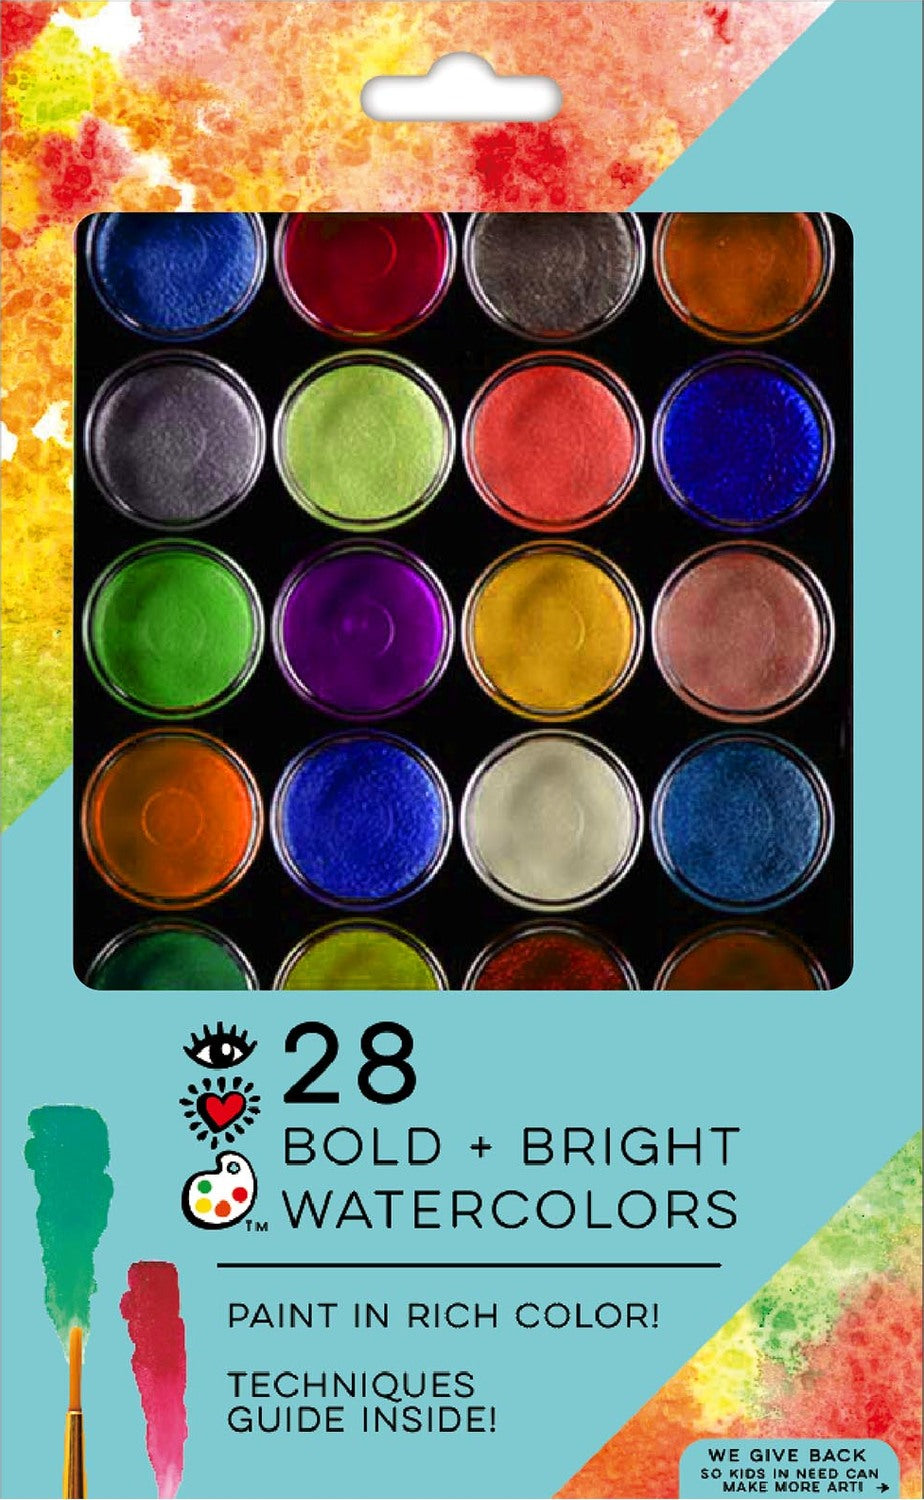 28 Watercolors-Bold and Bright